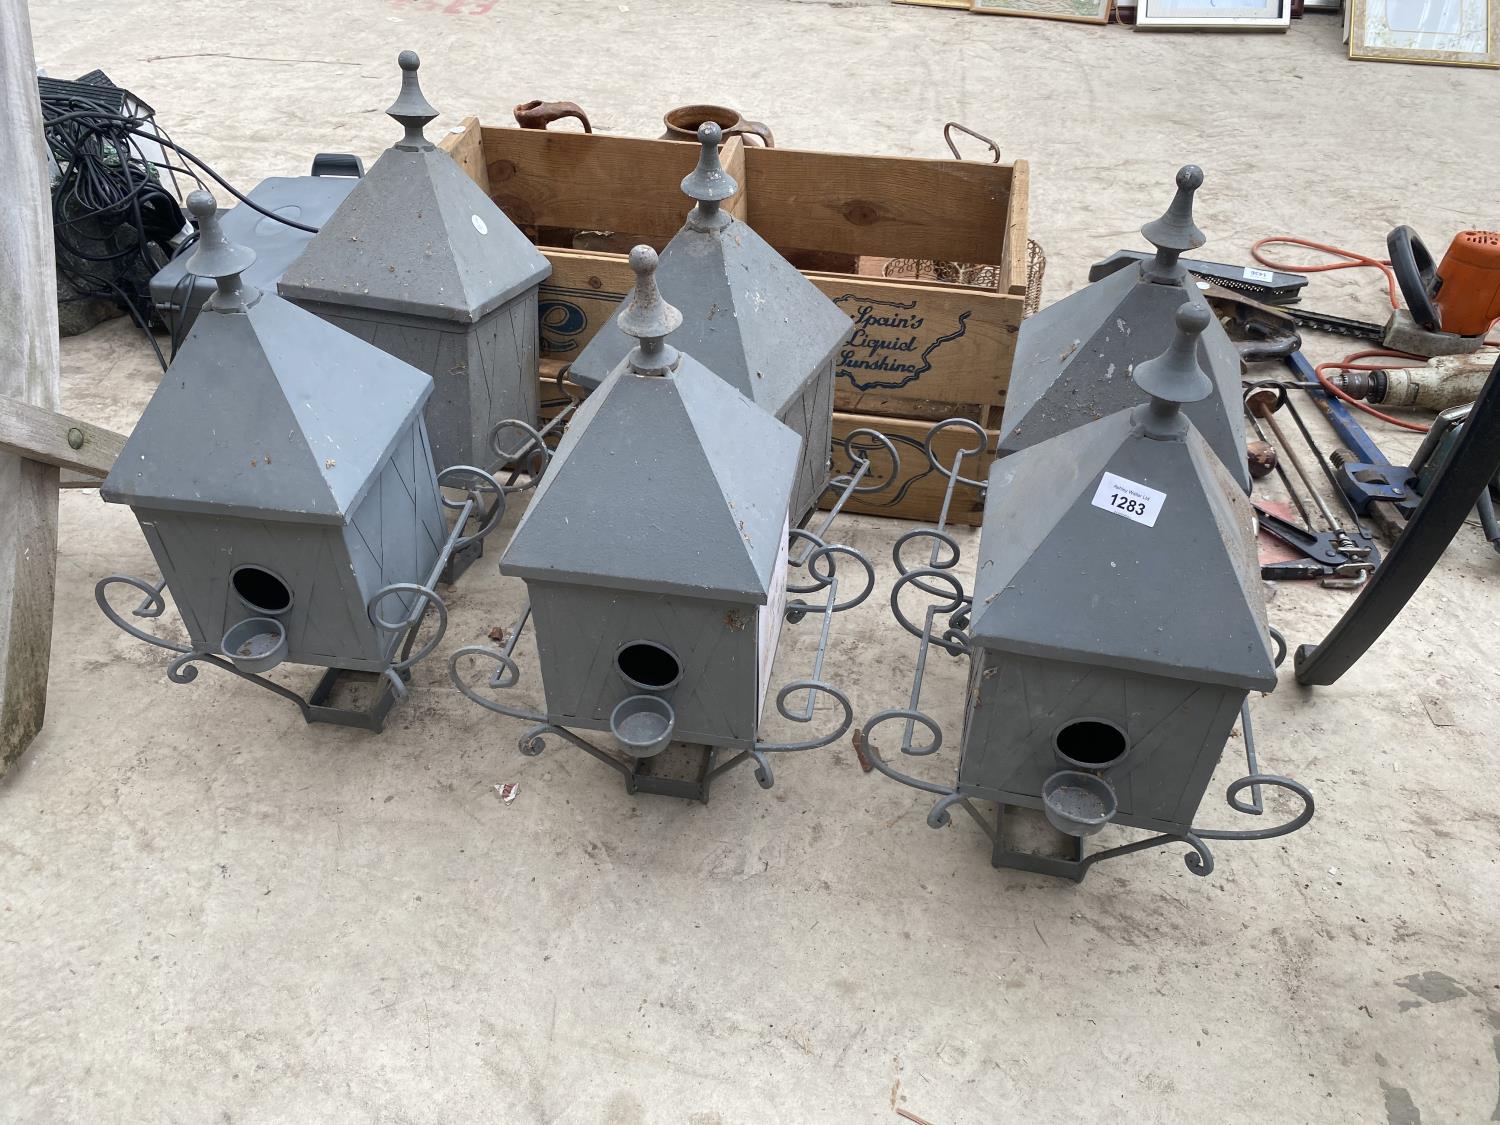 A GROUP OF SIX GOLF RELATED METAL BIRD BOXES